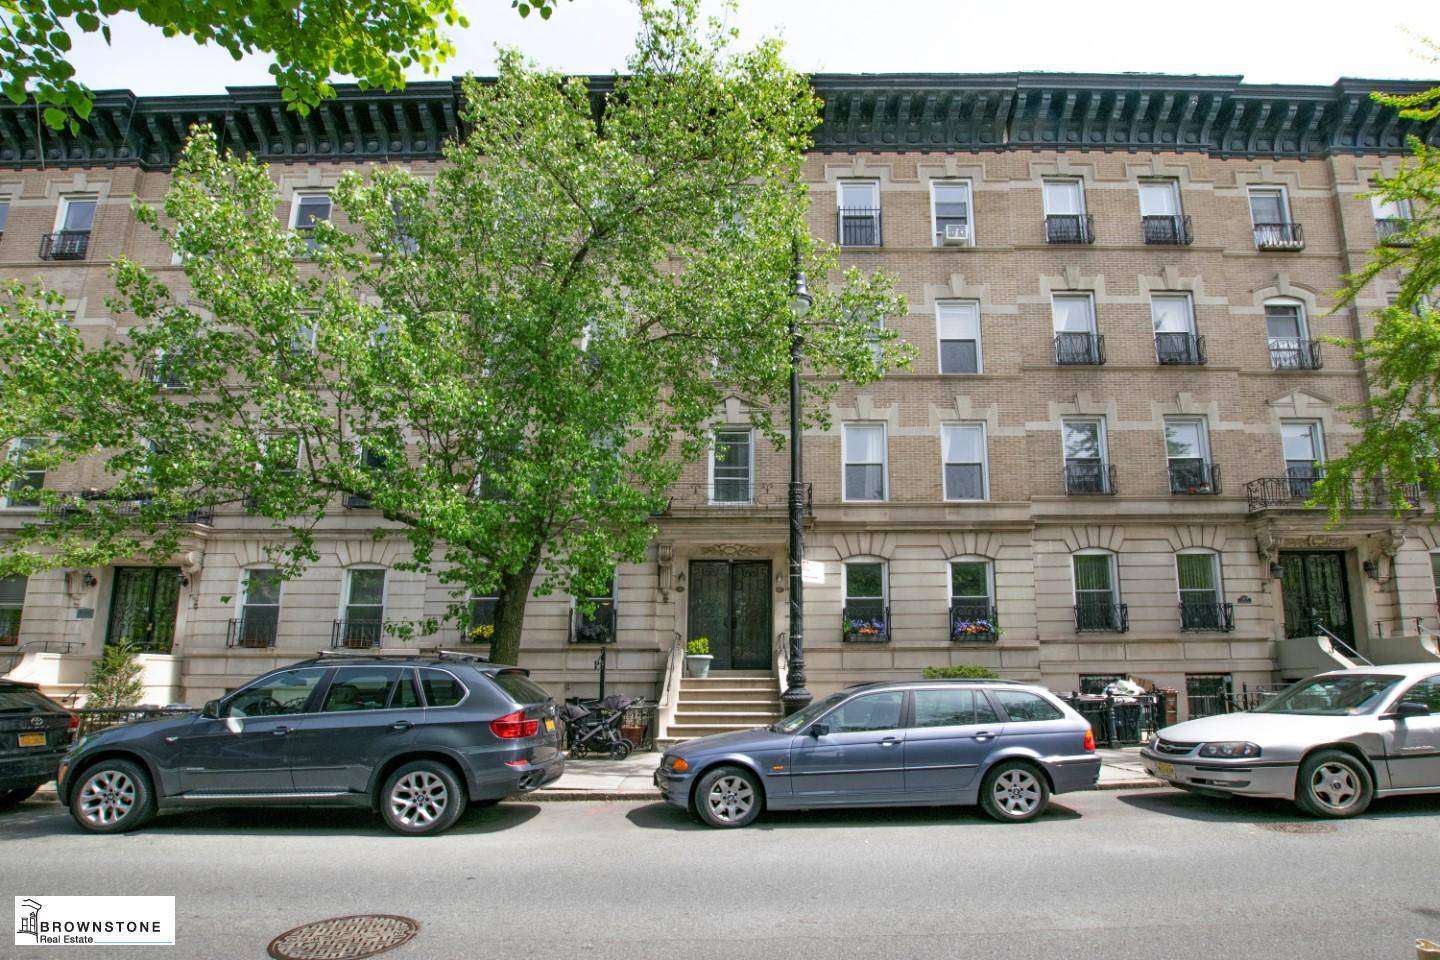 In the center of Brownstone Brooklyn in northern Carroll Gardens, 387 Clinton Street offers a sound investment opportunity, both financially and architecturally.